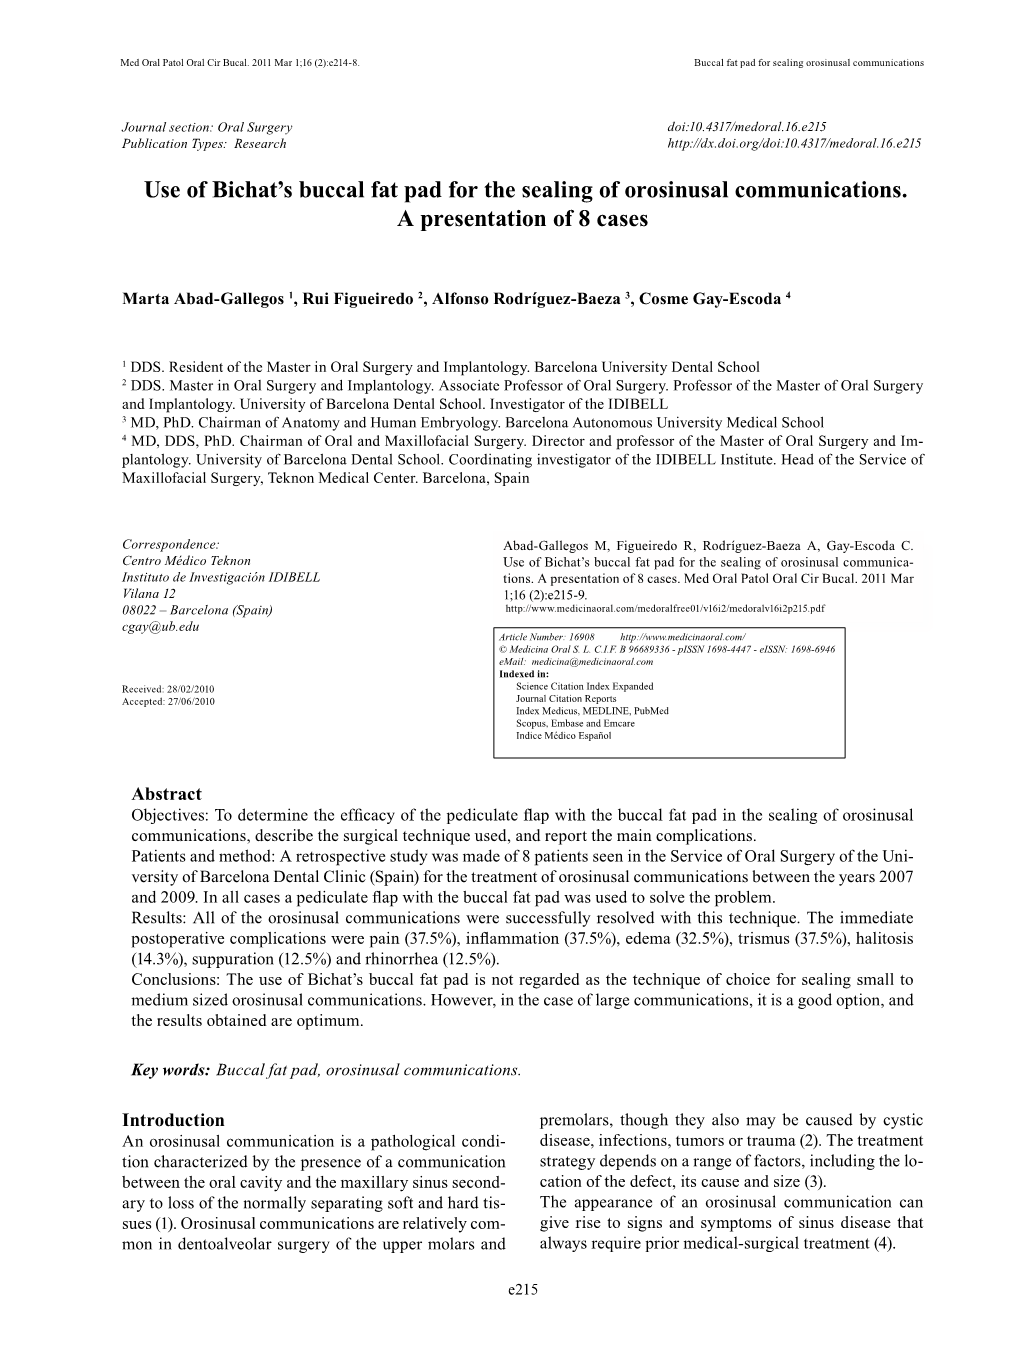 Use of Bichat's Buccal Fat Pad for the Sealing of Orosinusal